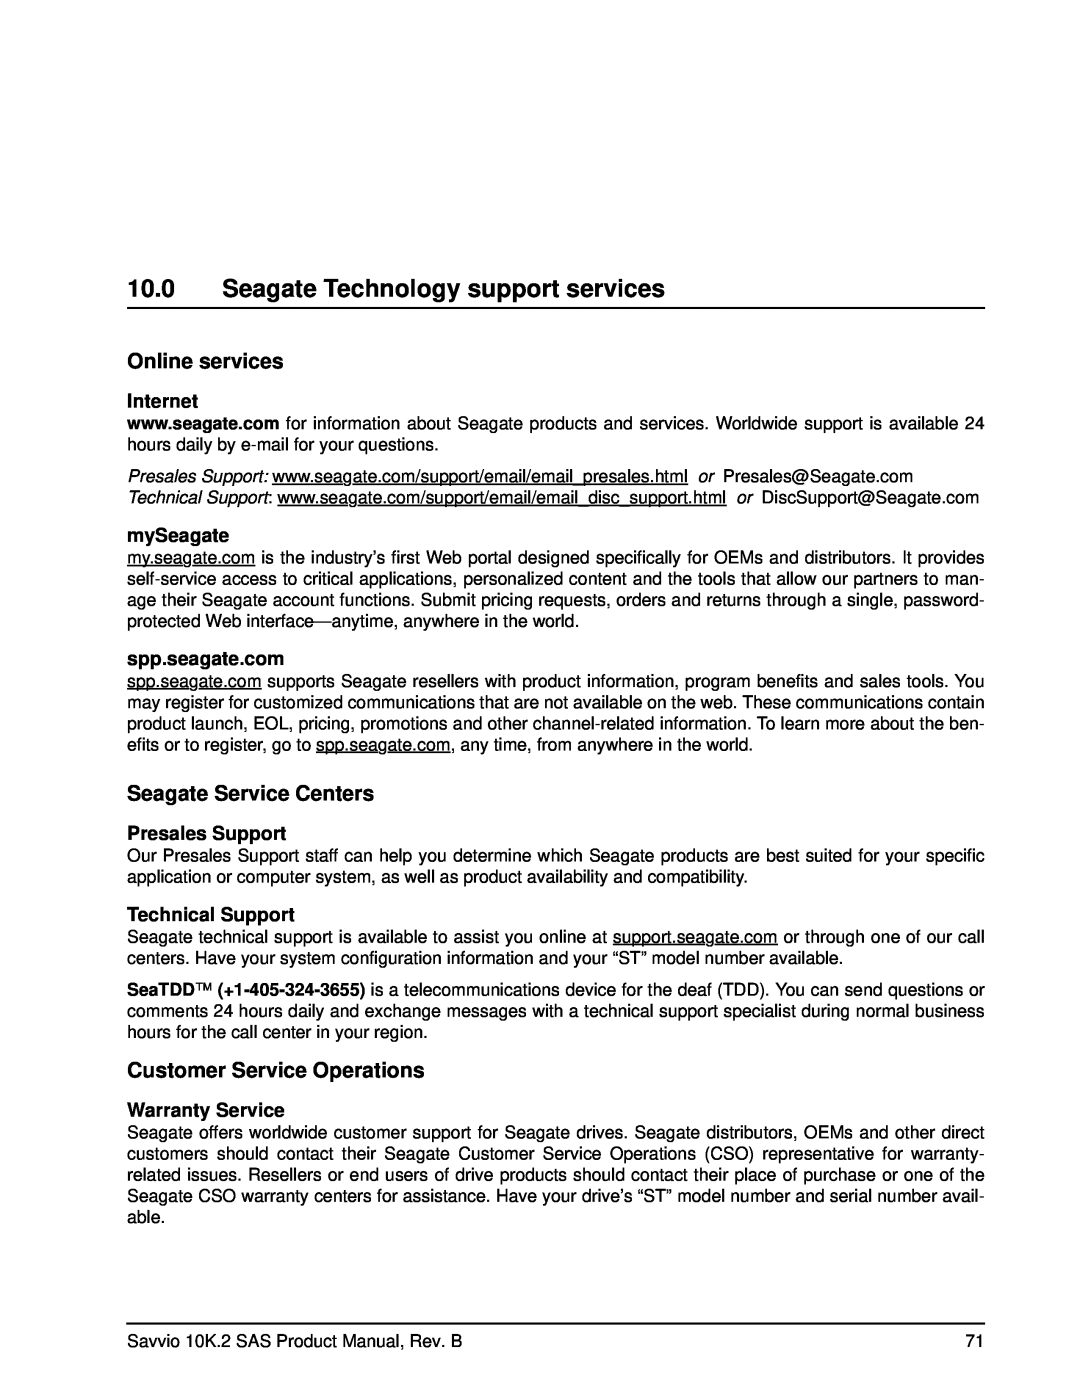 Seagate ST9146802SS Seagate Technology support services, Online services, Seagate Service Centers, Internet, mySeagate 